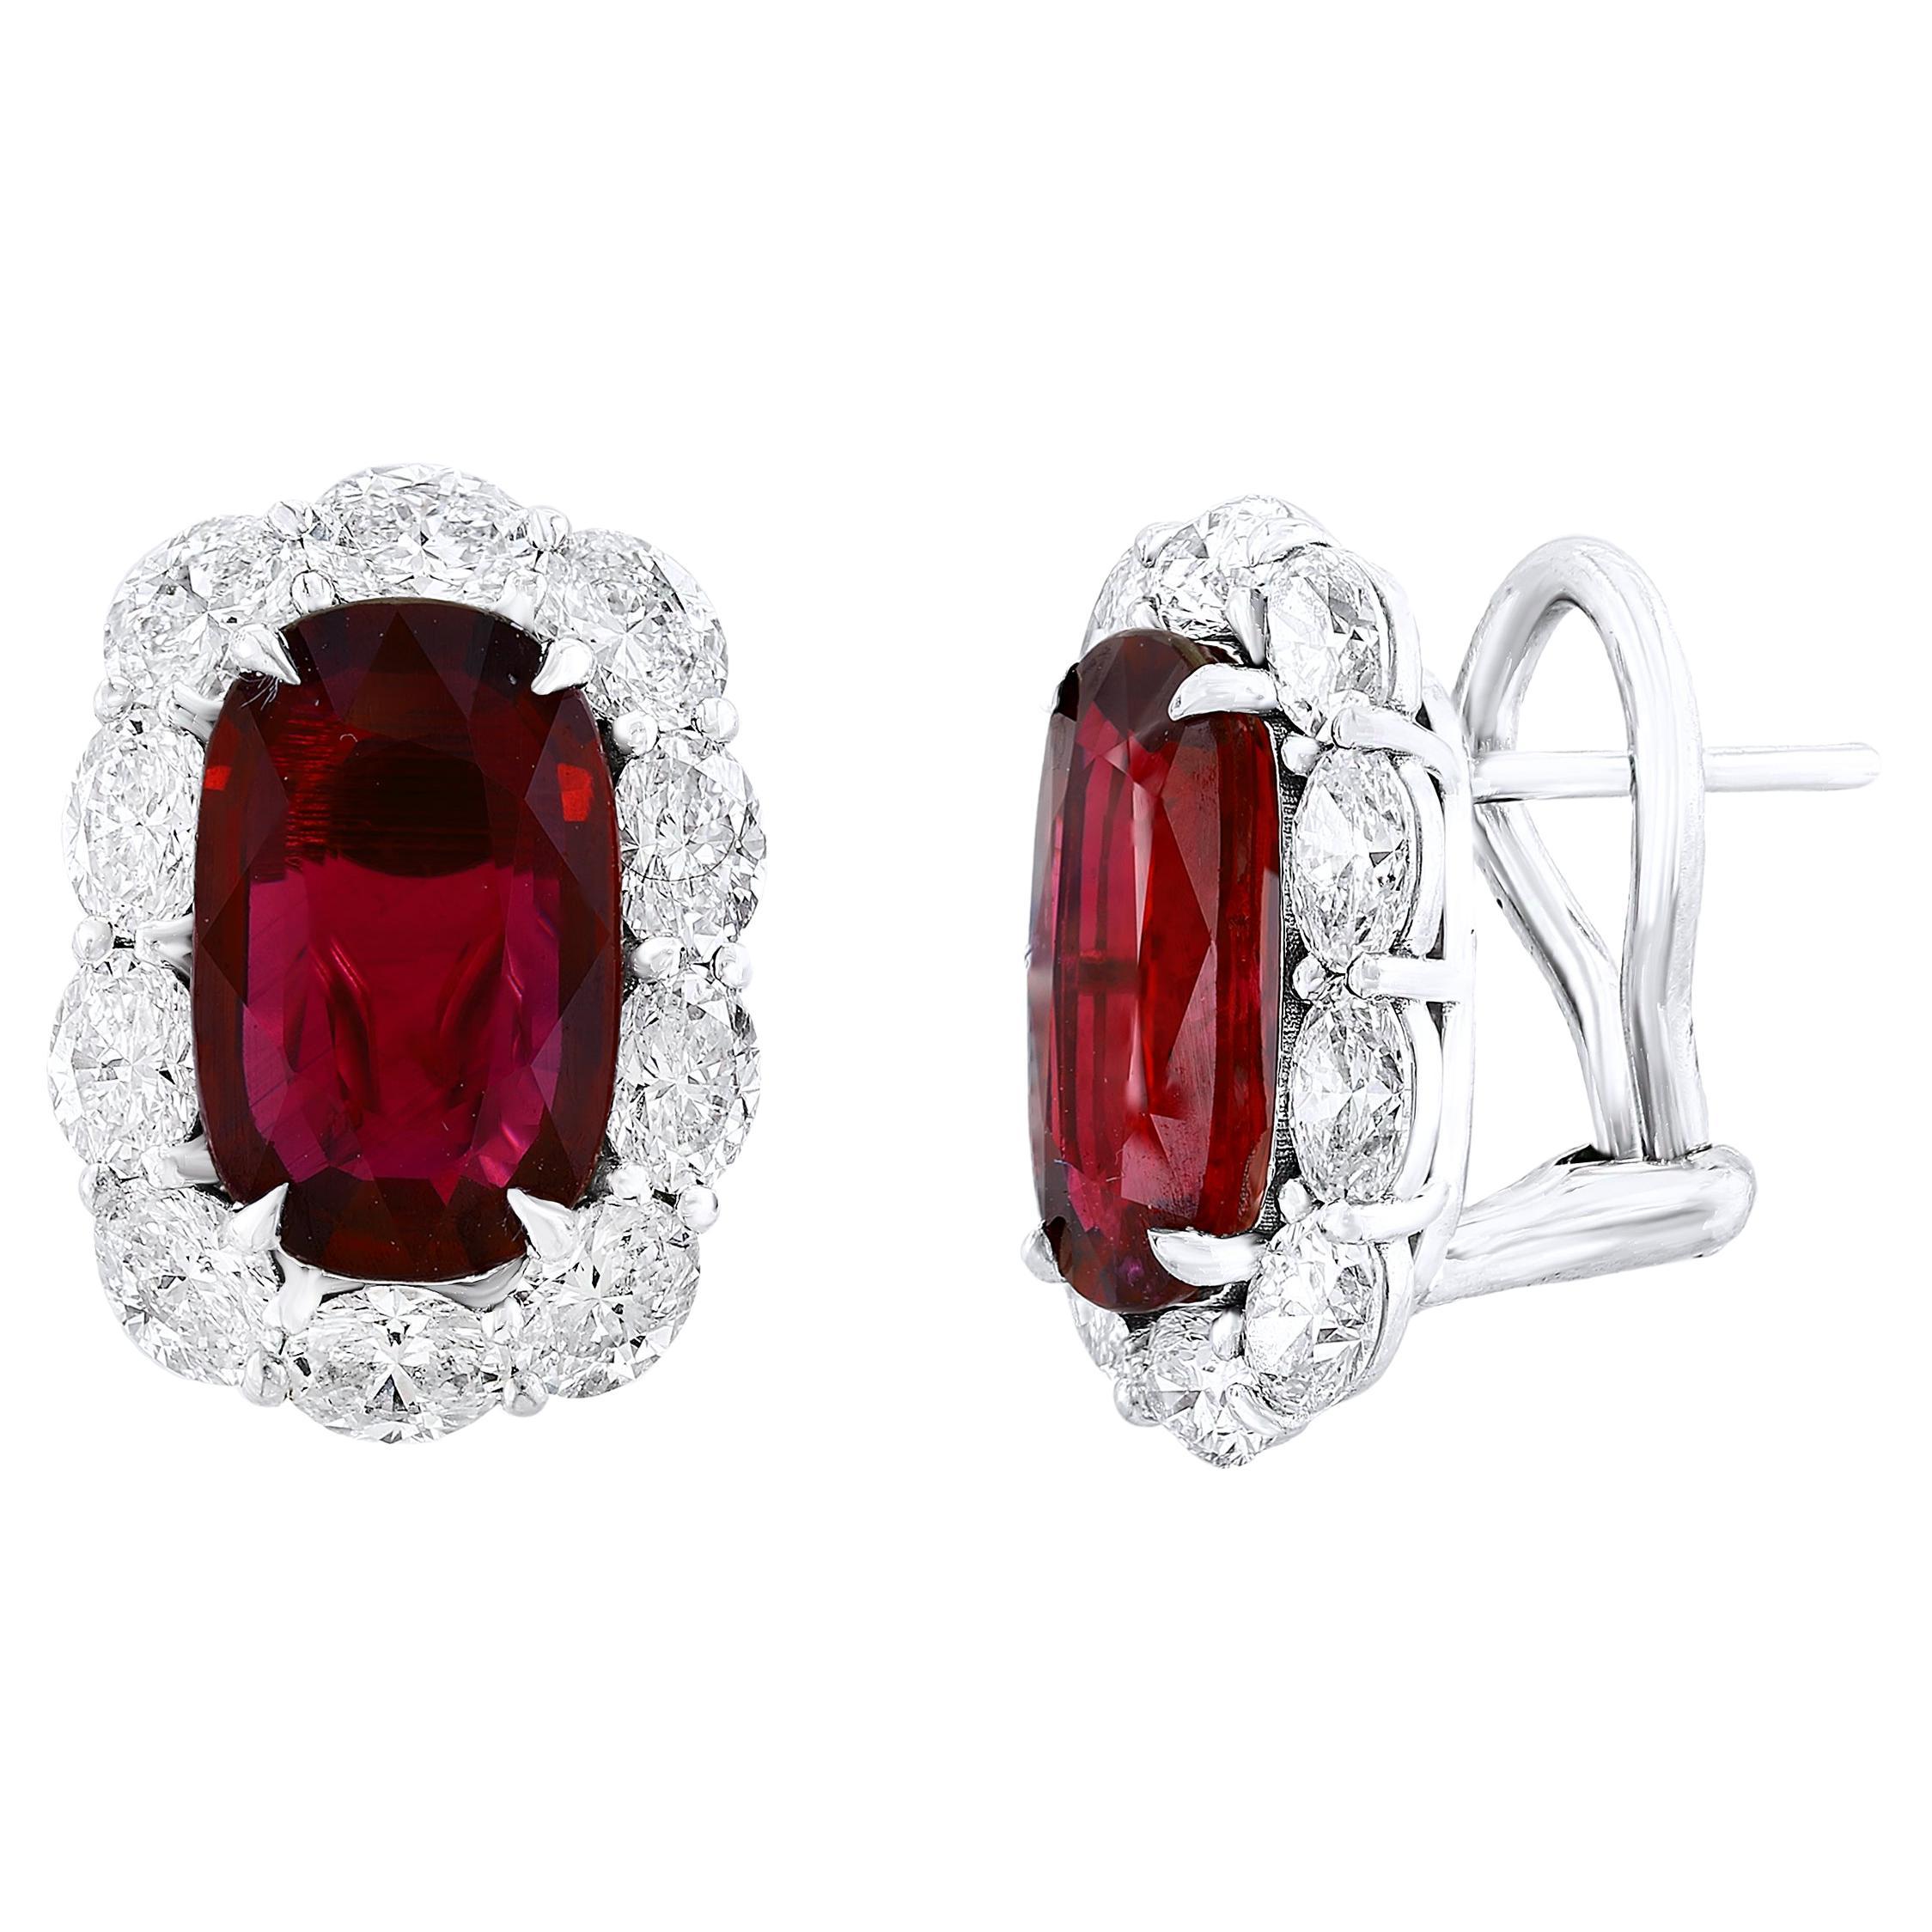 CERTIFIED 6.15 Carat Cushion Cut Ruby and Diamond Halo Earring in 18K White Gold